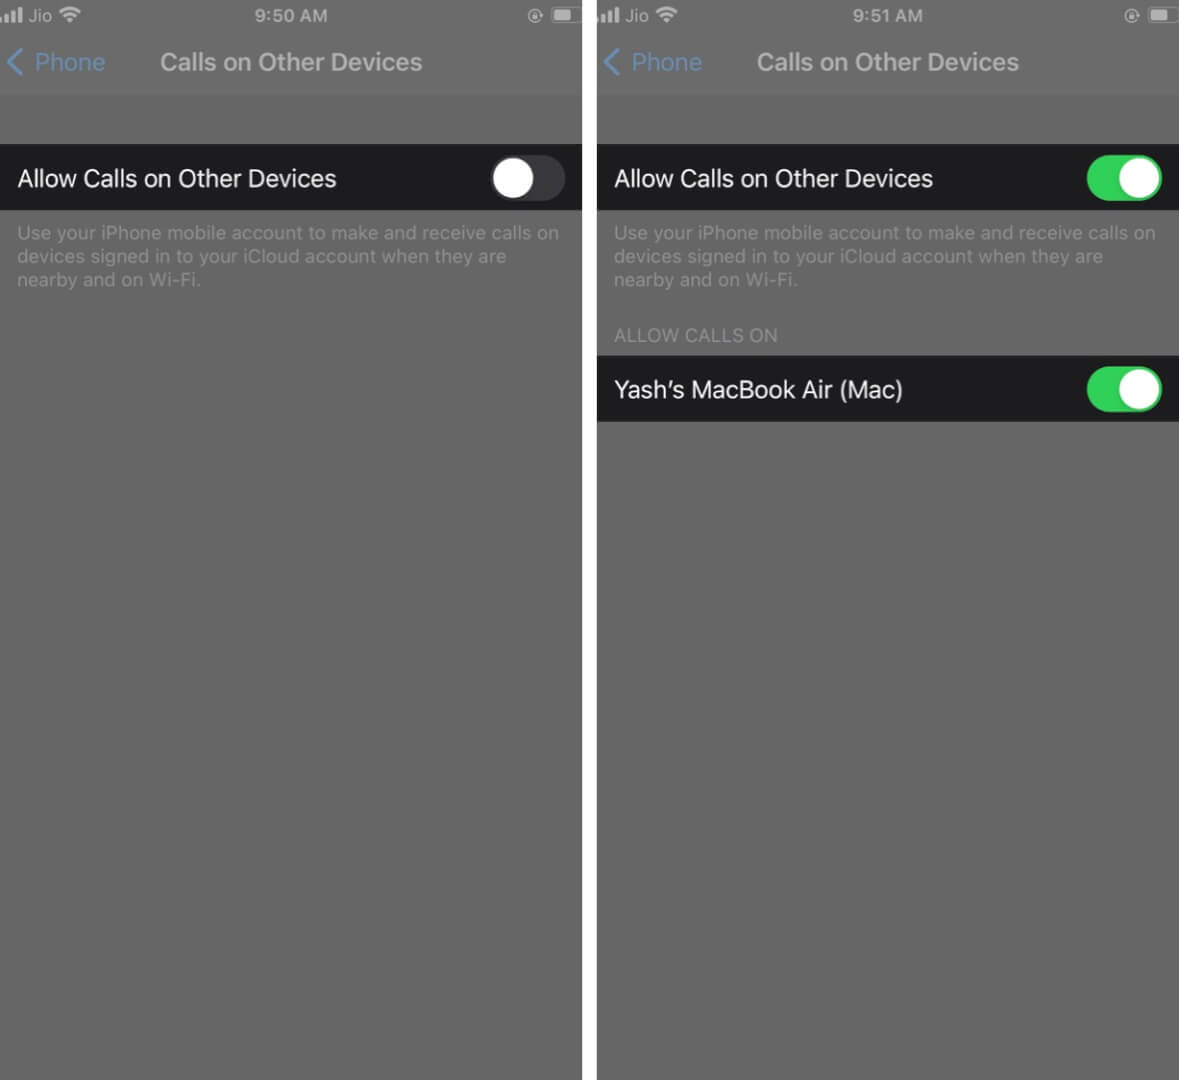 Turn On Allow Calls on Other Devices and Enable Toggle for Device on iPhone